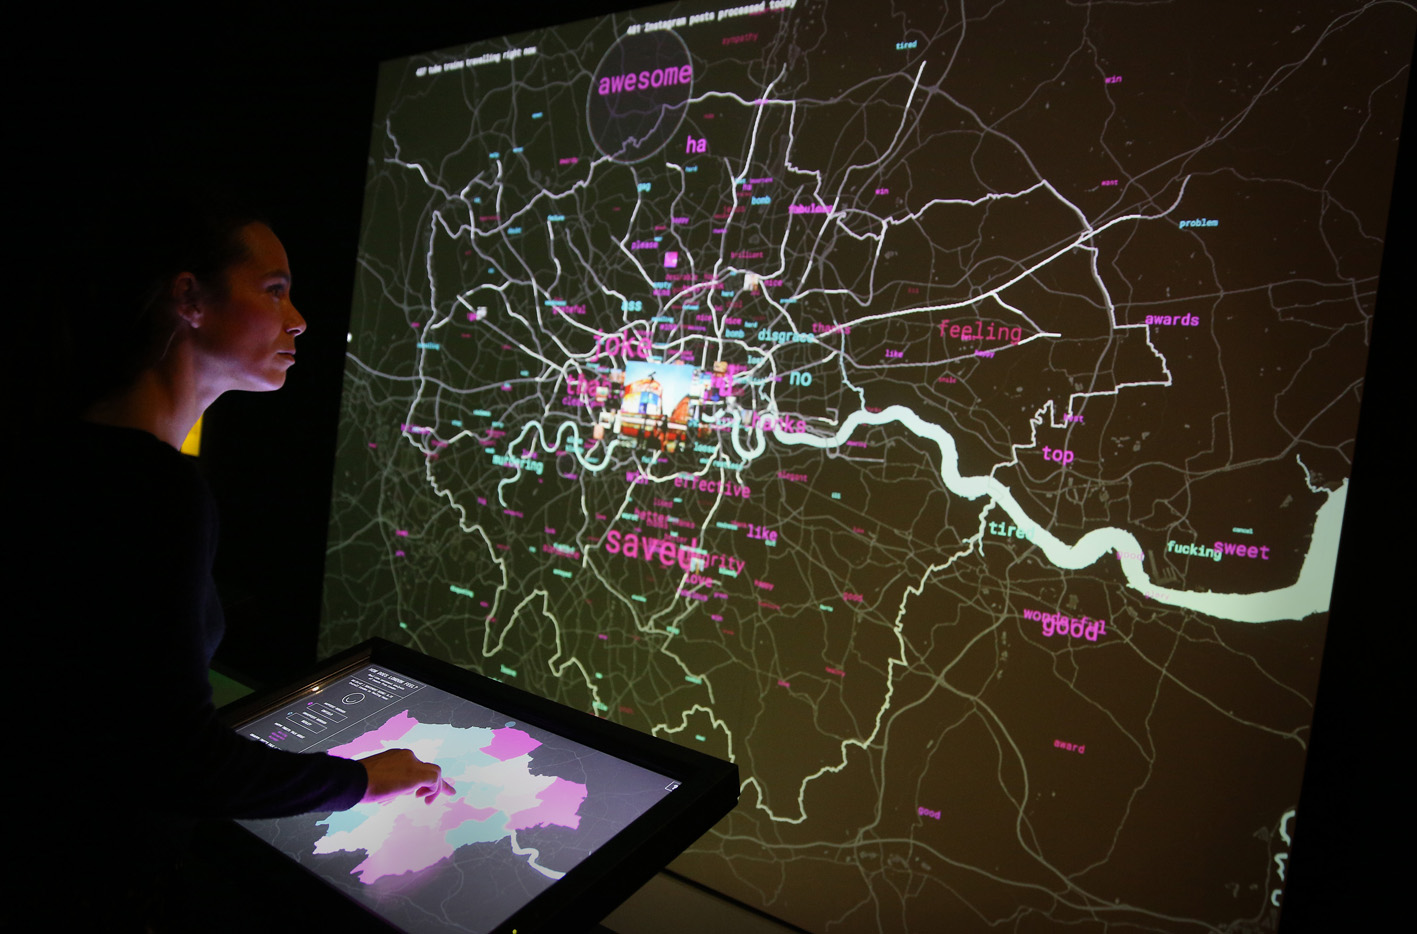 LONDON, ENGLAND - DECEMBER 02: A staff member interacts with a live social media map of London at the Big Bang Data exhibition at Somerset House on December 2, 2015 in London, England. The show highlights the data explosion that's radically transforming our lives. It opens on December 3, 2015 and runs until February 28, 2016 at Somerset House. (Photo by Peter Macdiarmid/Getty Images for Somerset House)